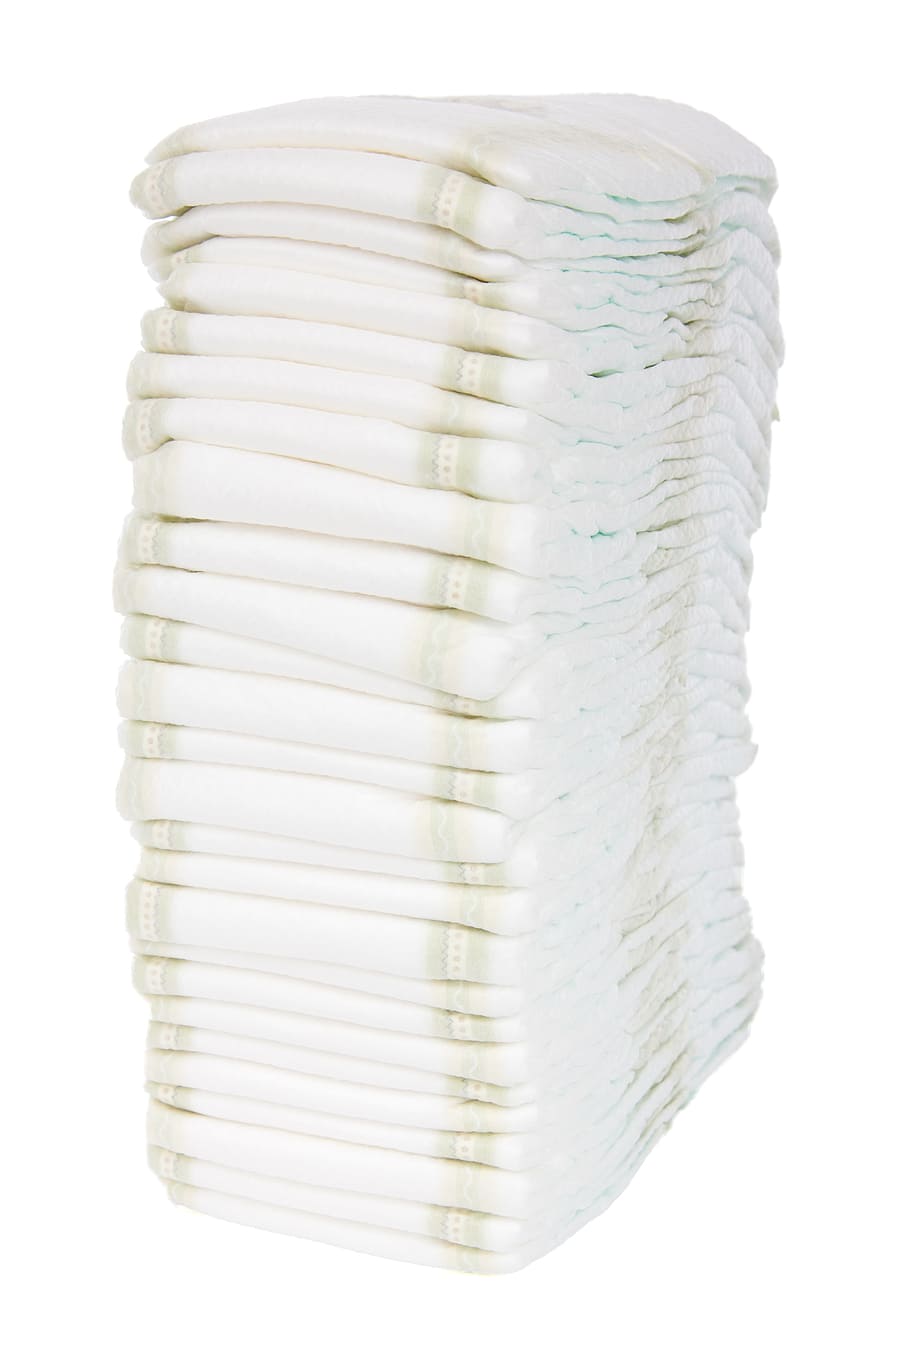 stacked white towels, Baby, Diaper, Disposable, Isolated, baby, diaper, nappy, stack, supplies, white